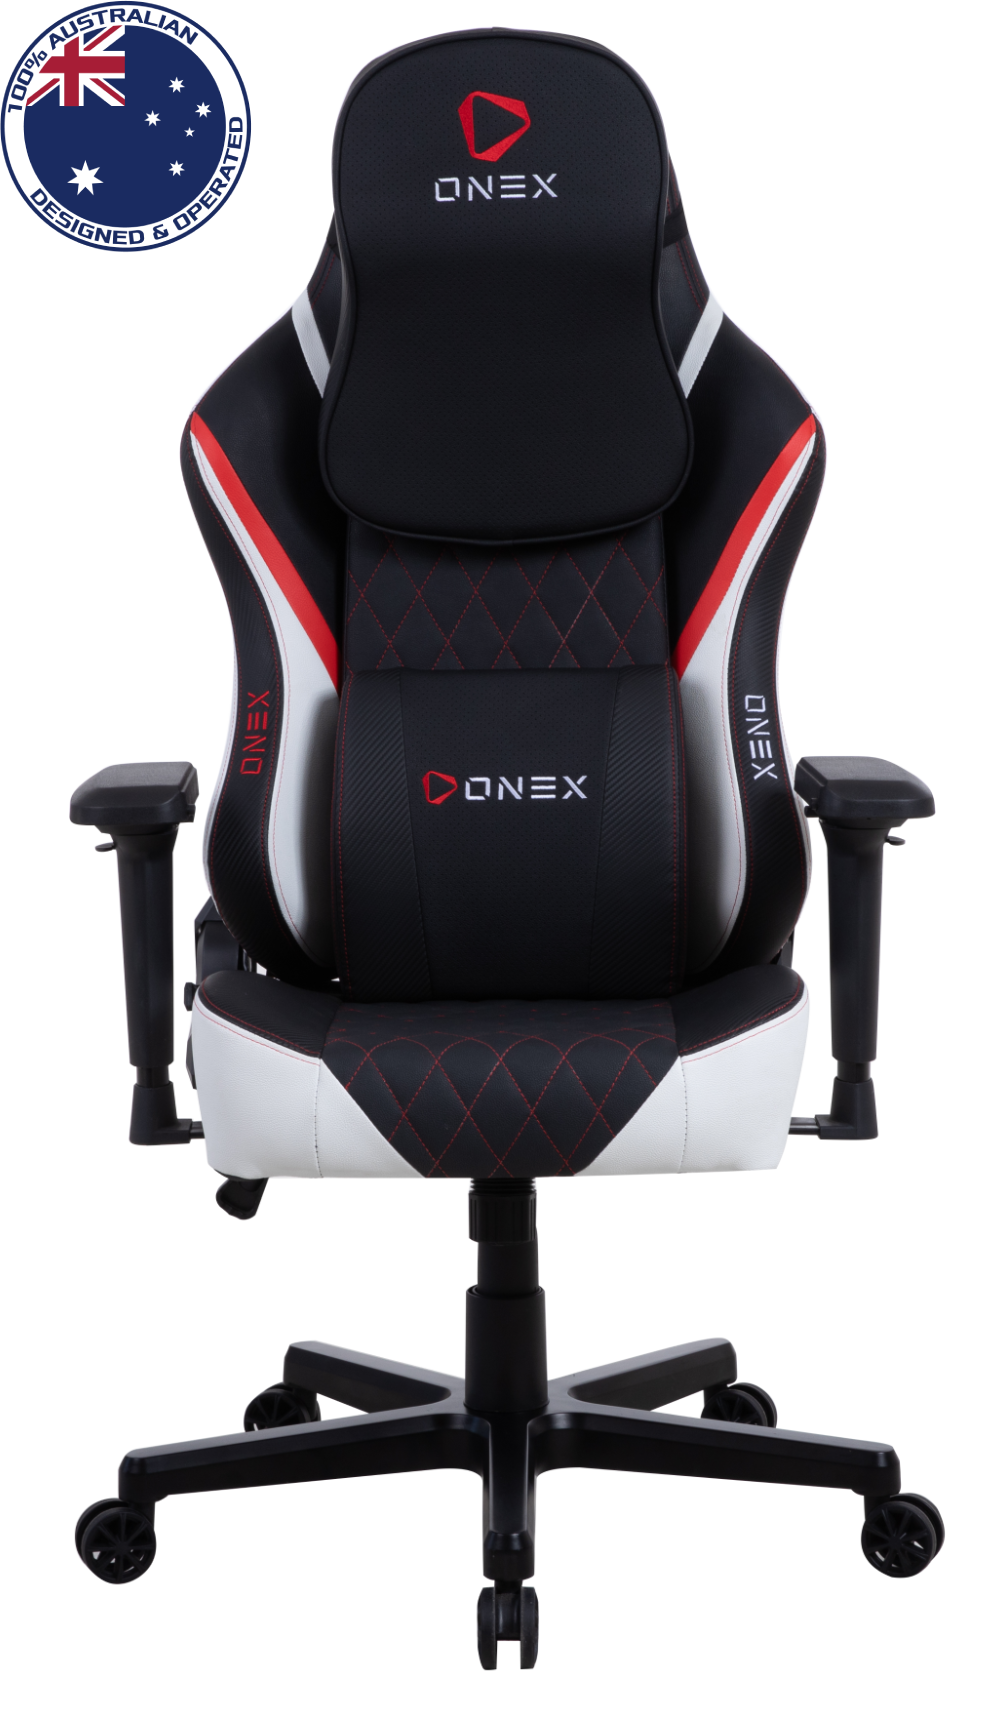  ONEX-FX8 Gaming /Office Chair - Black/Red/White<BR><fONT COLOR='RED'>In-Store Pickup Not Available - Delivery Only (Freight Charges Apply)  